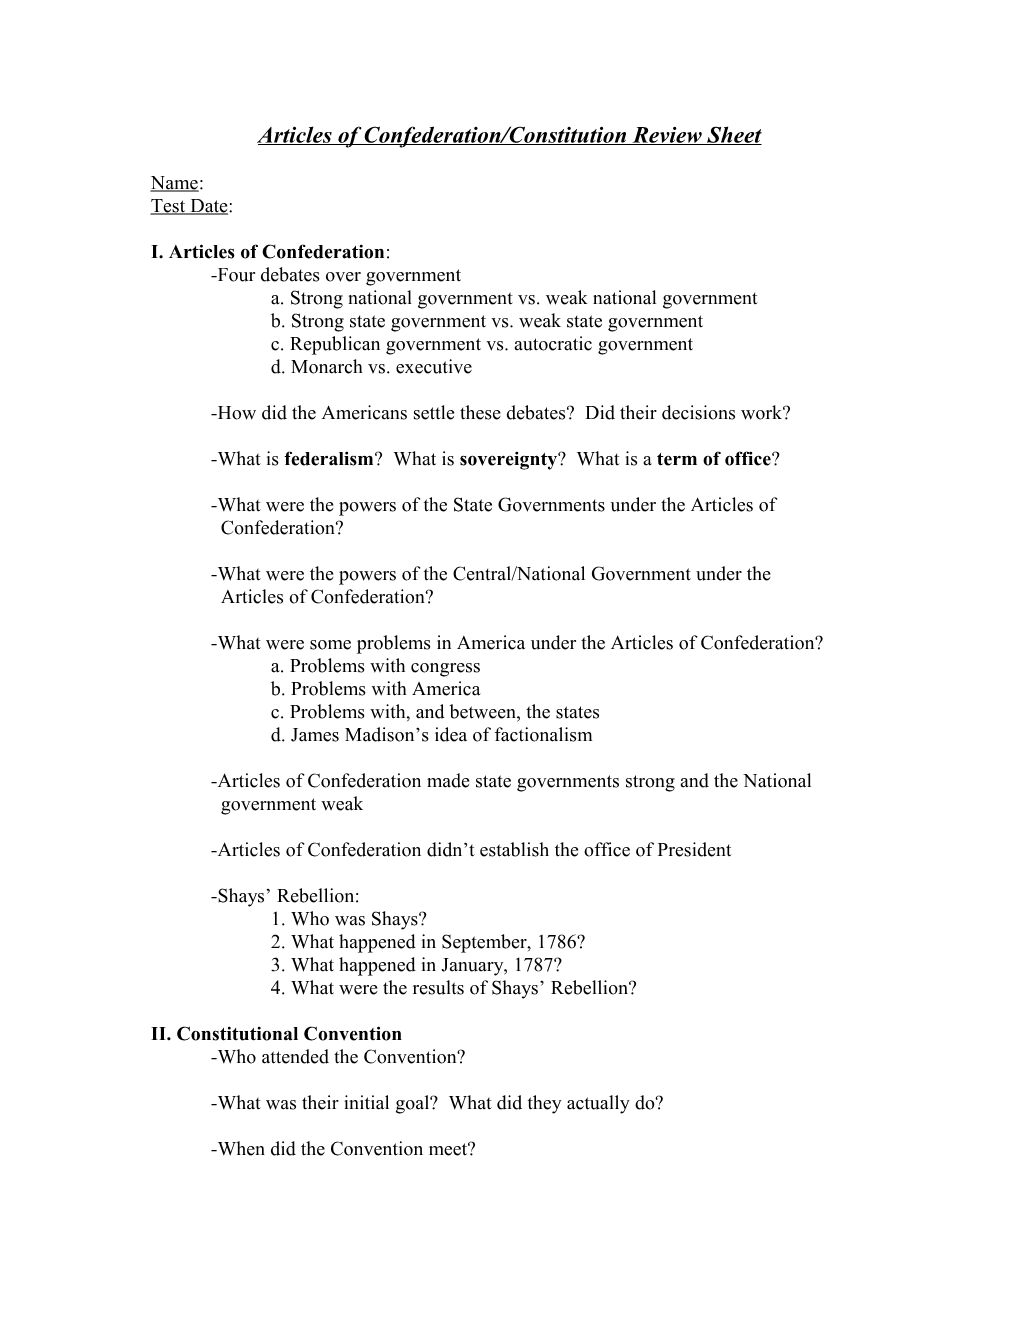 Articles of Confederation/Constitution Review Sheet